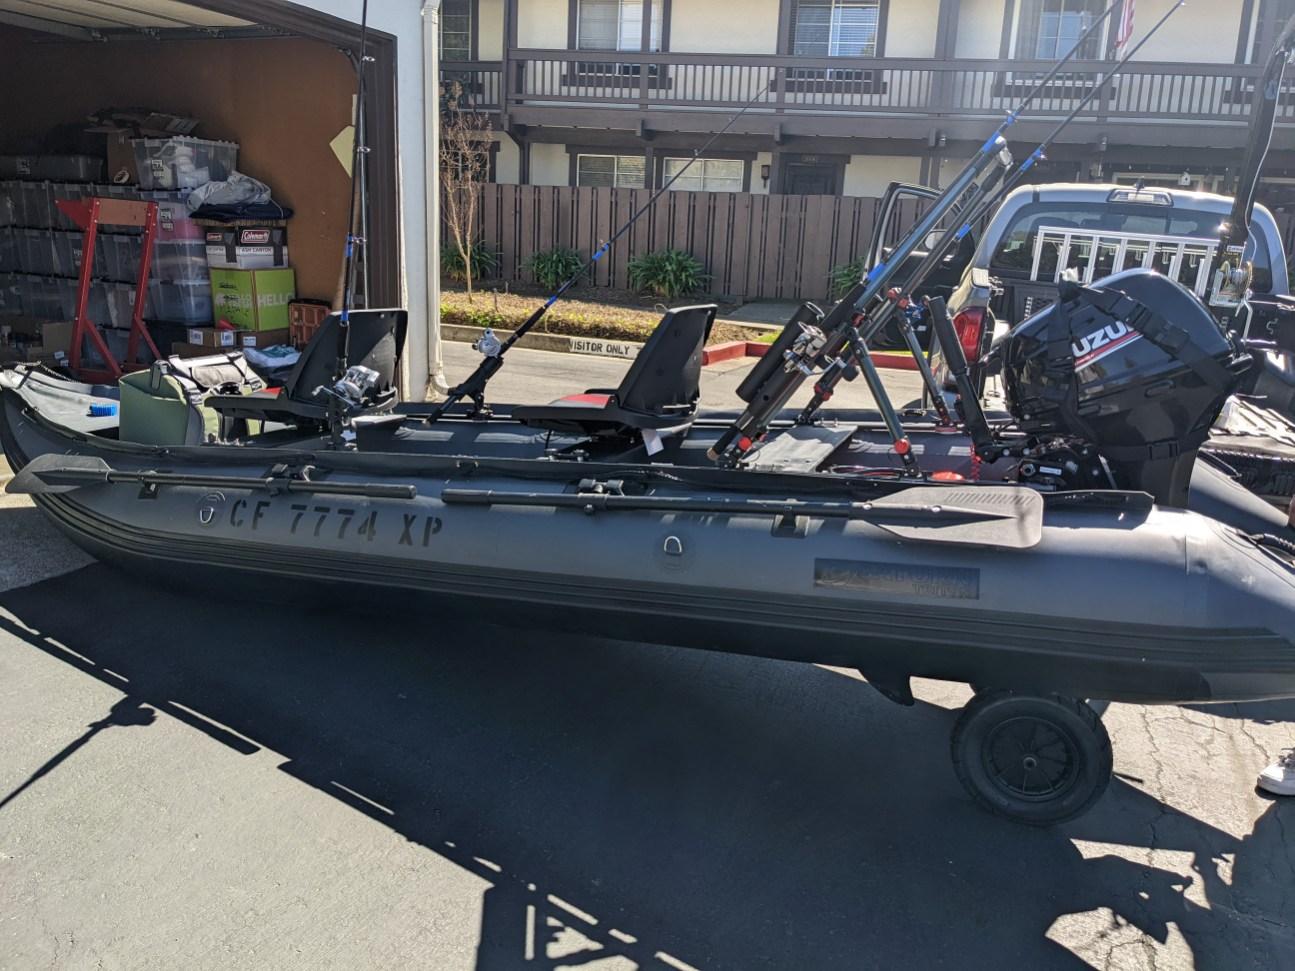 Customer Photo of 2022 15' Saturn Triton Outfitter KaBoat - Customer Added Accessories Not Included